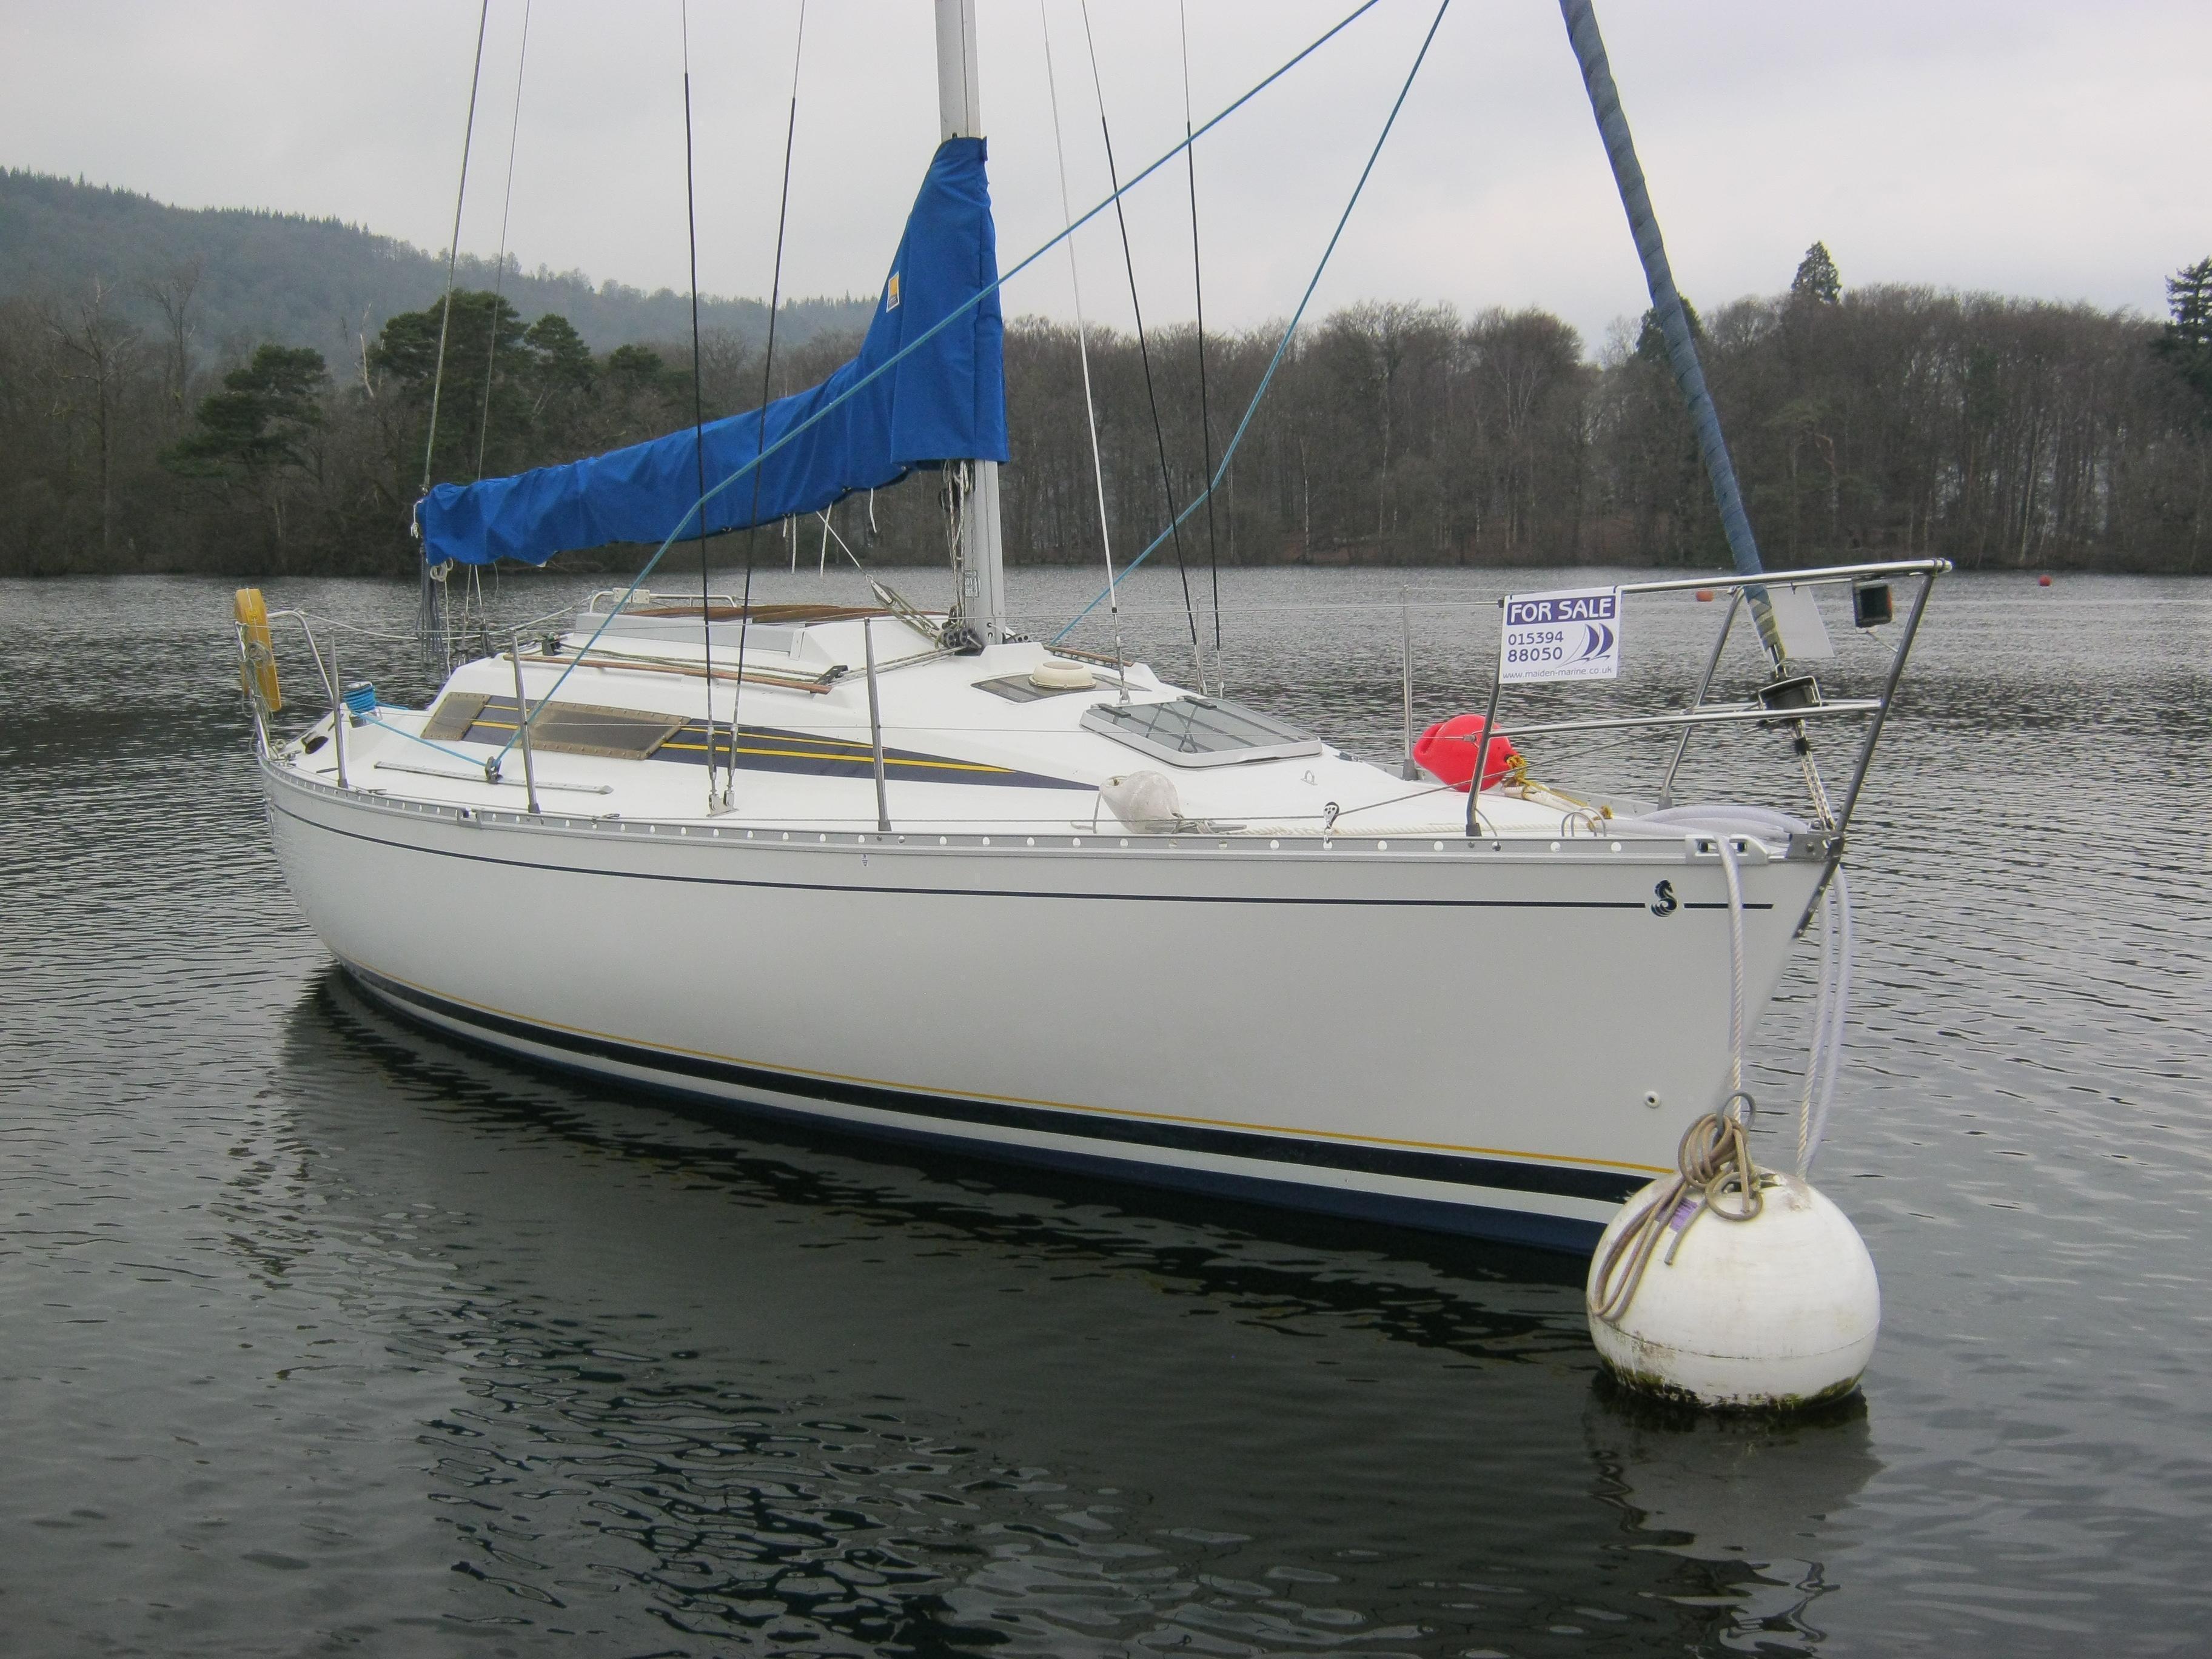 Beneteau First 29, Bowness on Windermere, Cumbria